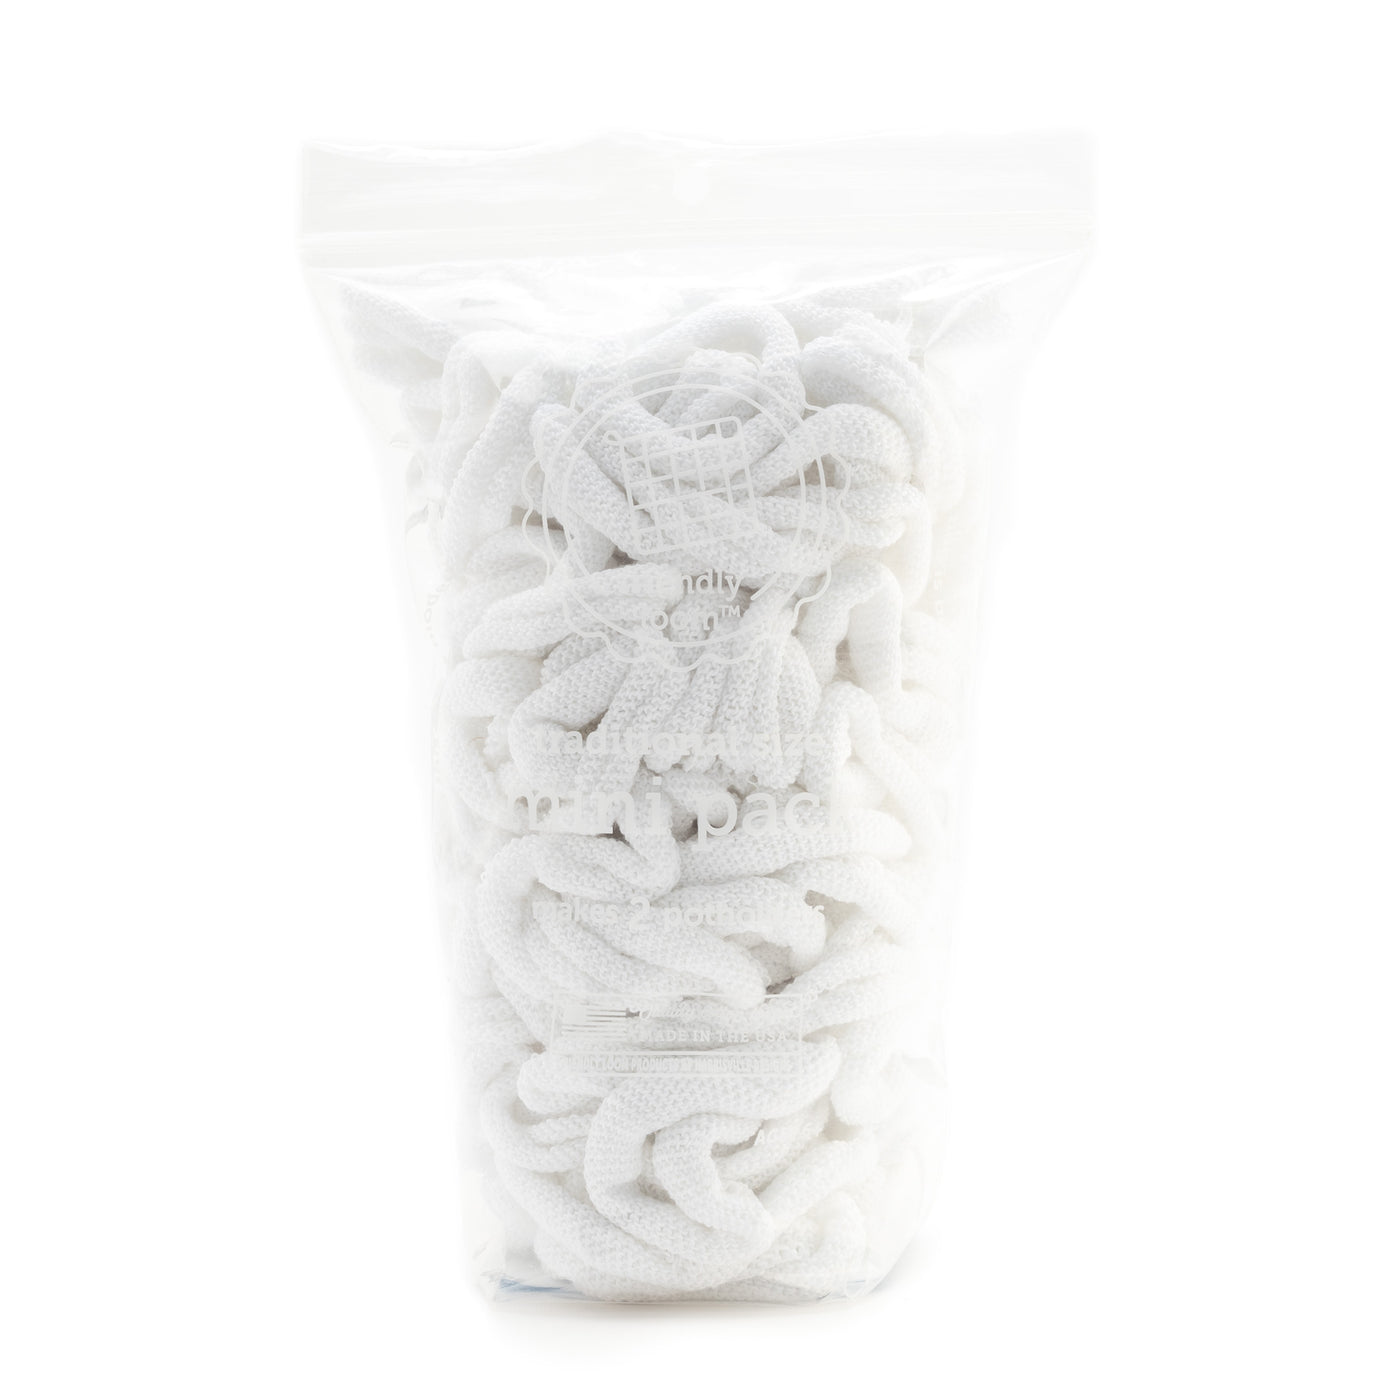 Harrisville Cotton Potholder Loops - Traditional Size – Twist